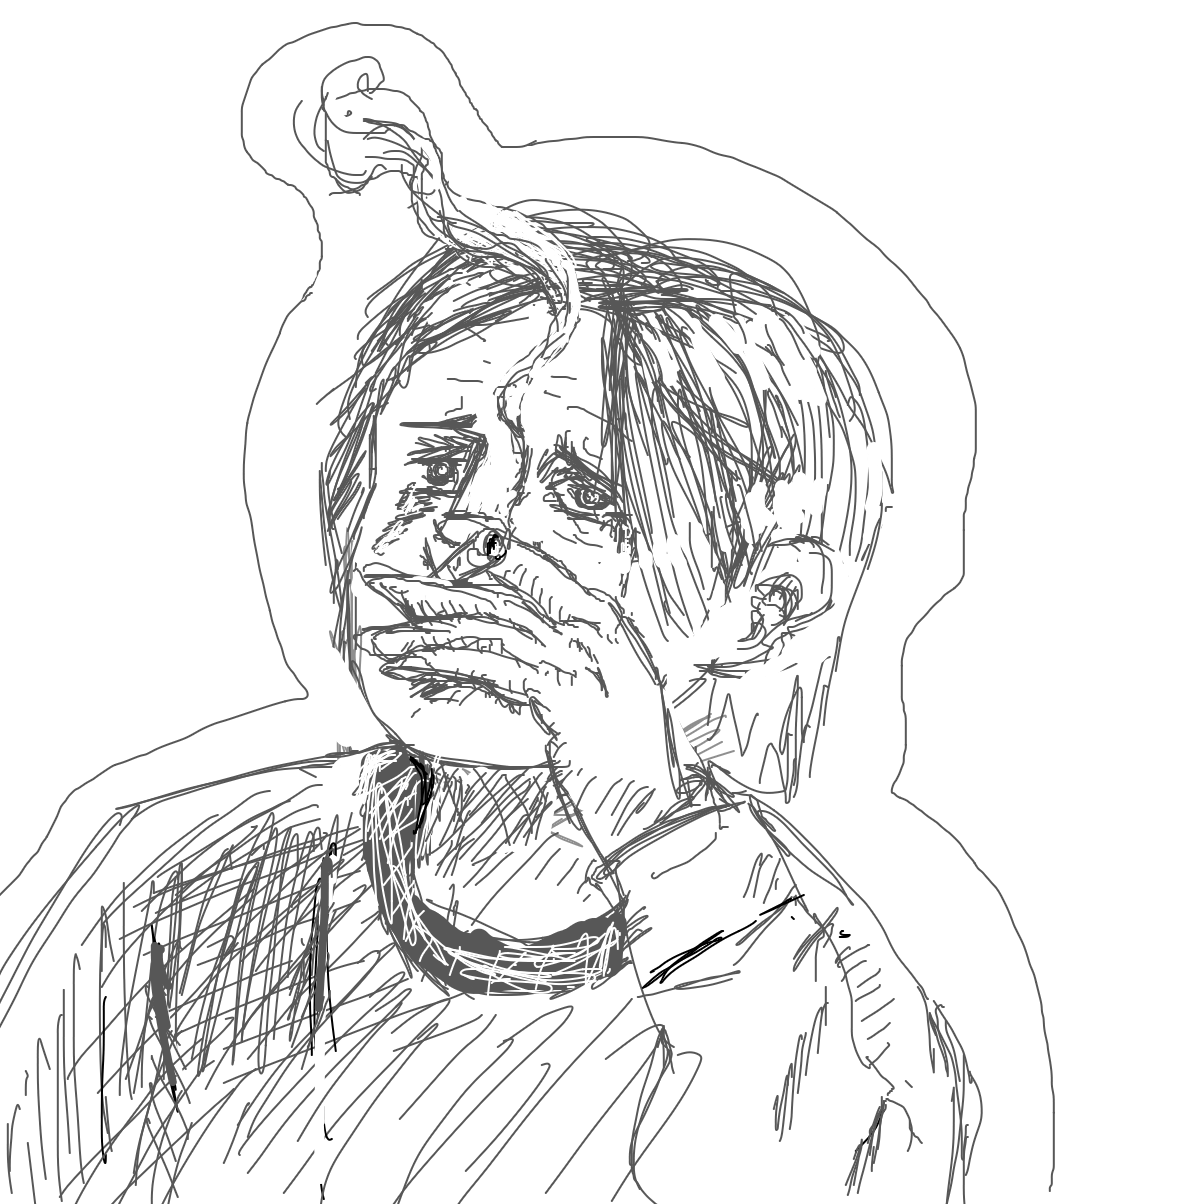 I don’t smoke tho - Online Drawing Game Comic Strip Panel by l’intrus